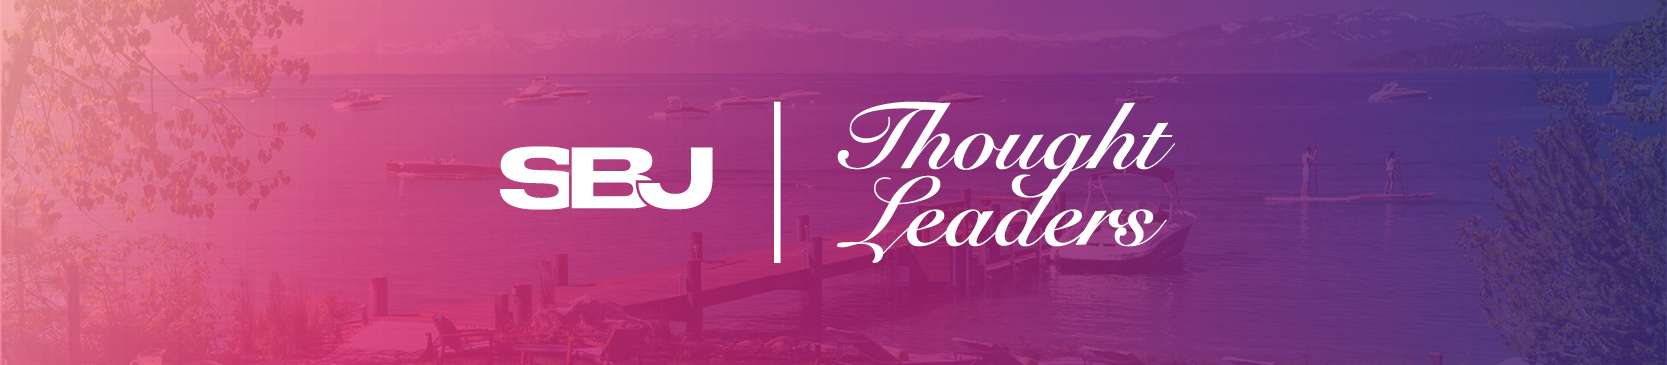 SBJ | Thought Leaders